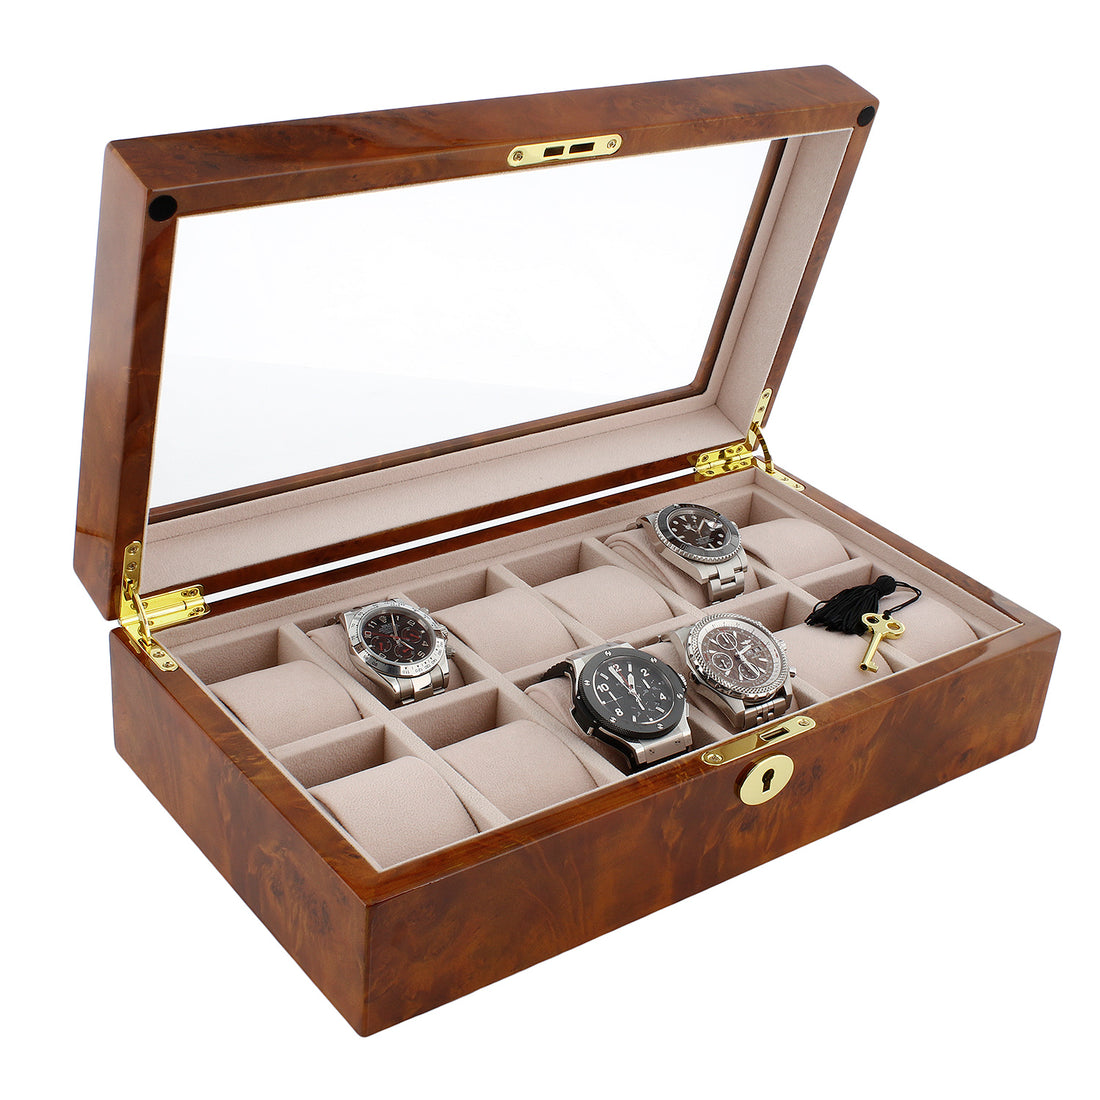 Why Every Man Needs a Watch Box